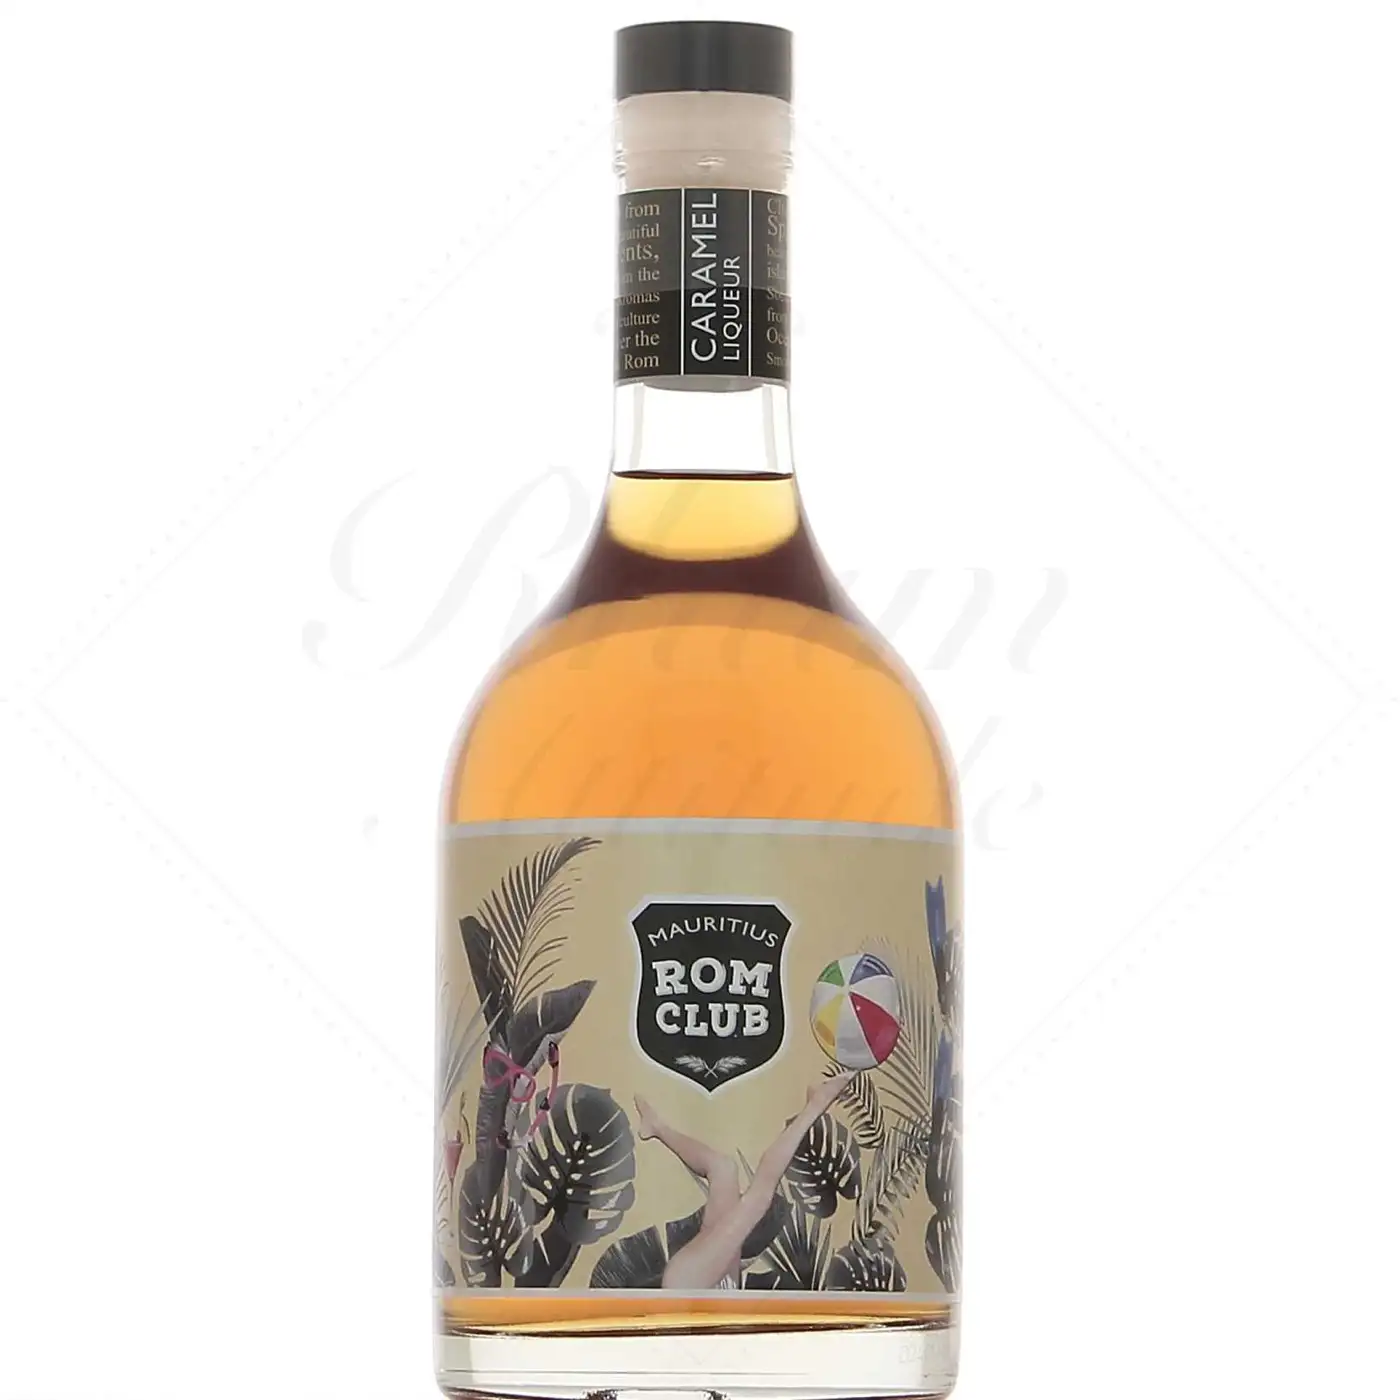 Image of the front of the bottle of the rum Mauritius Rom Club Caramel